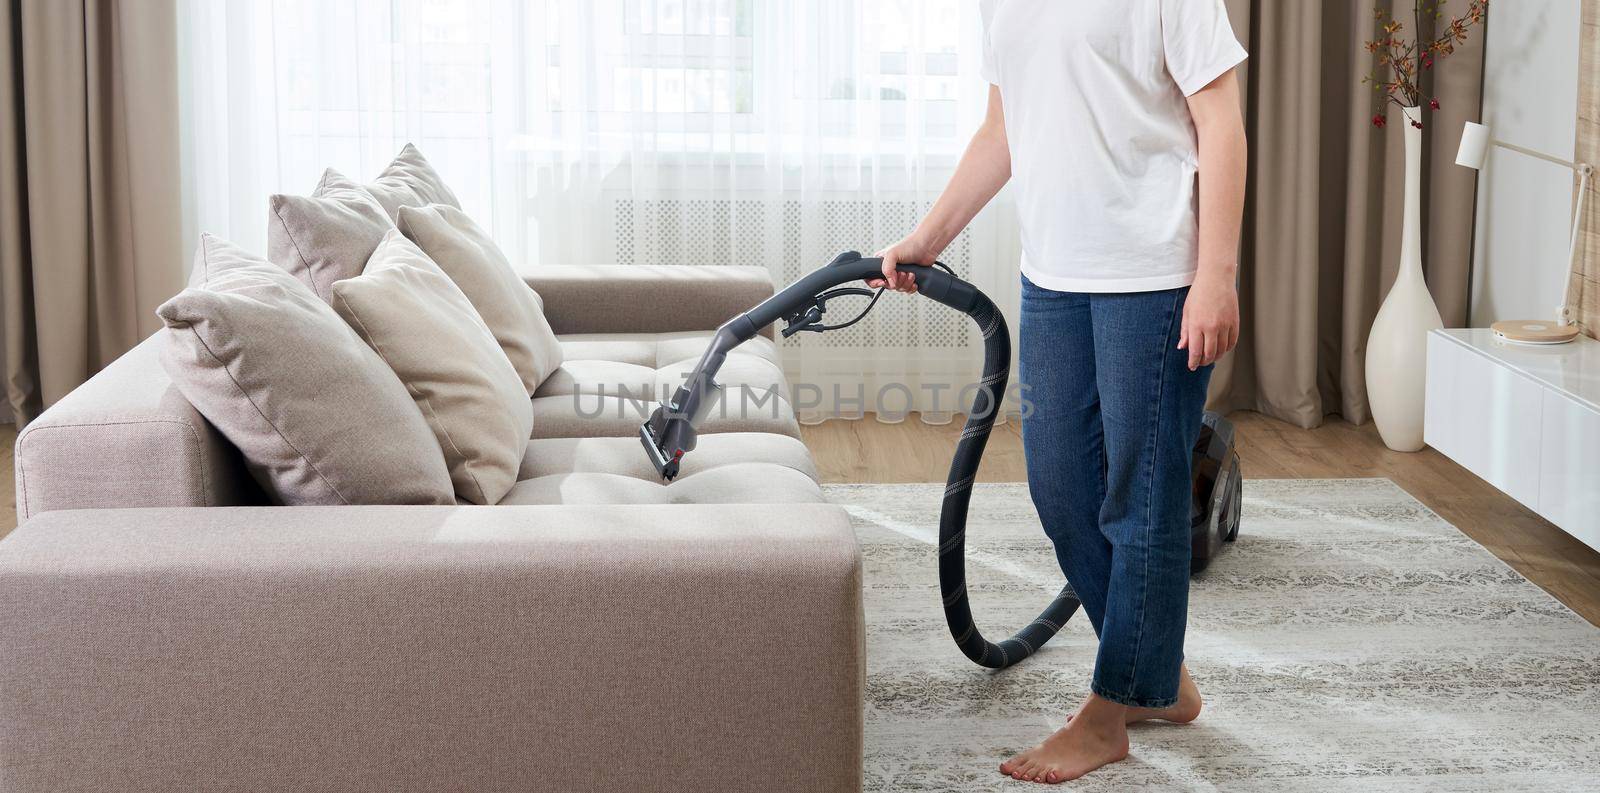 Housewife Cleaning Sofa With a Vacuum Cleaner